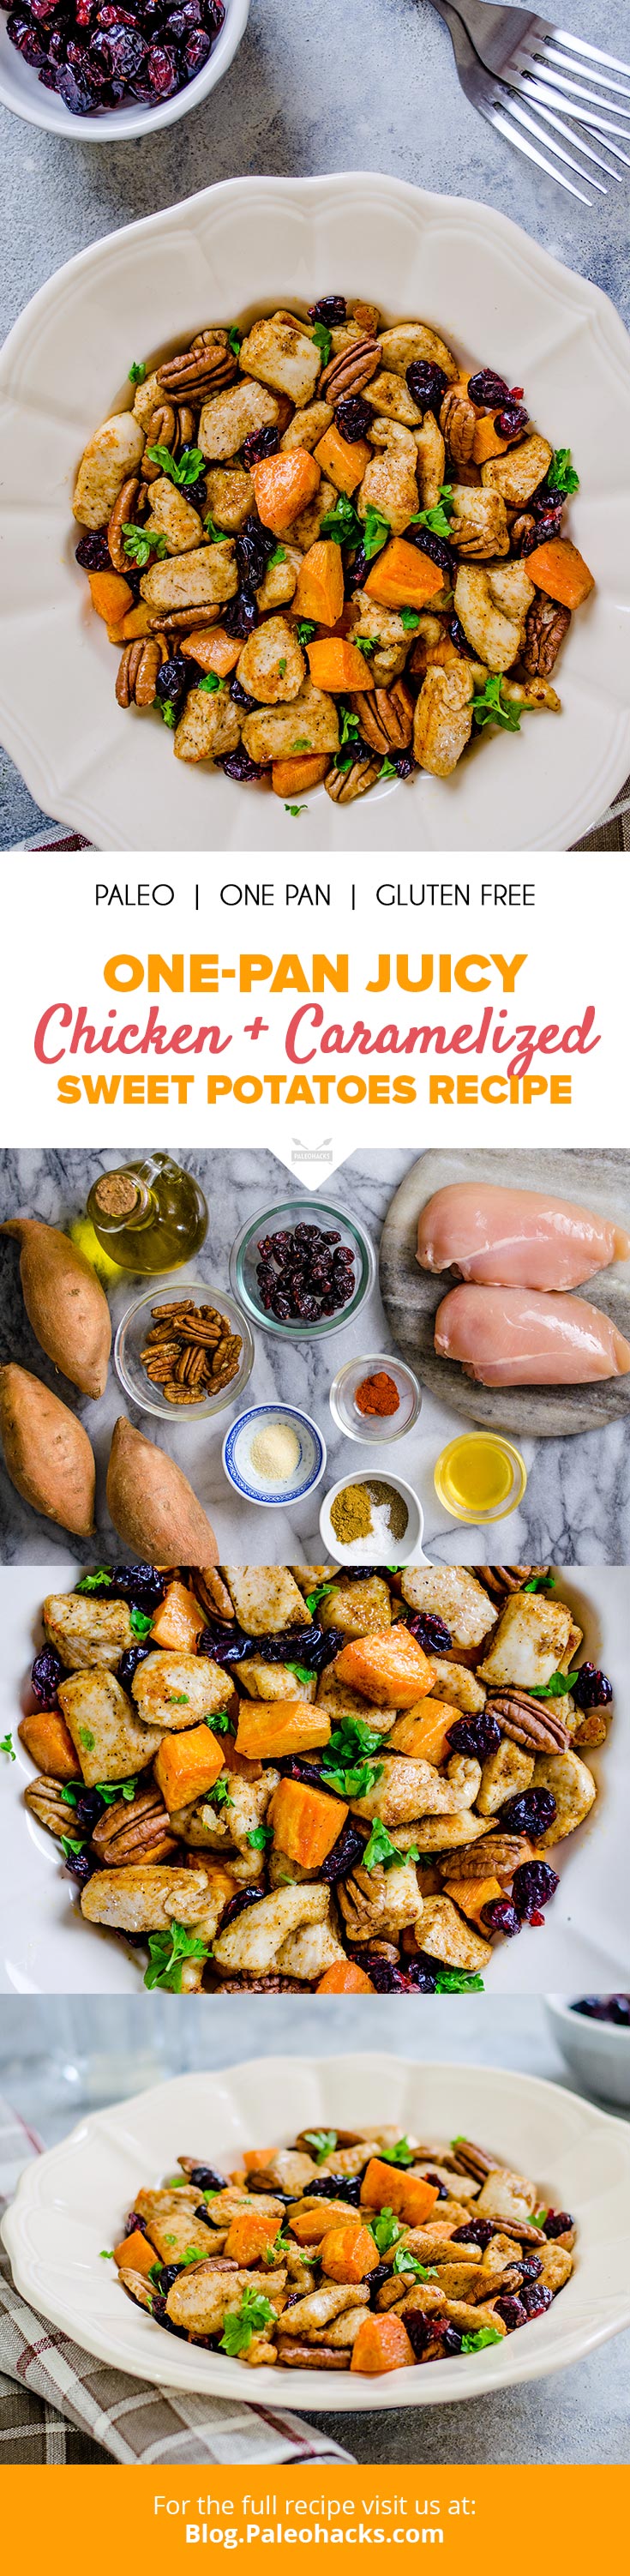 Bursting with juicy chicken and caramelized sweet potatoes, this easy one-tray recipe will have dinner on the table in under 40 minutes.